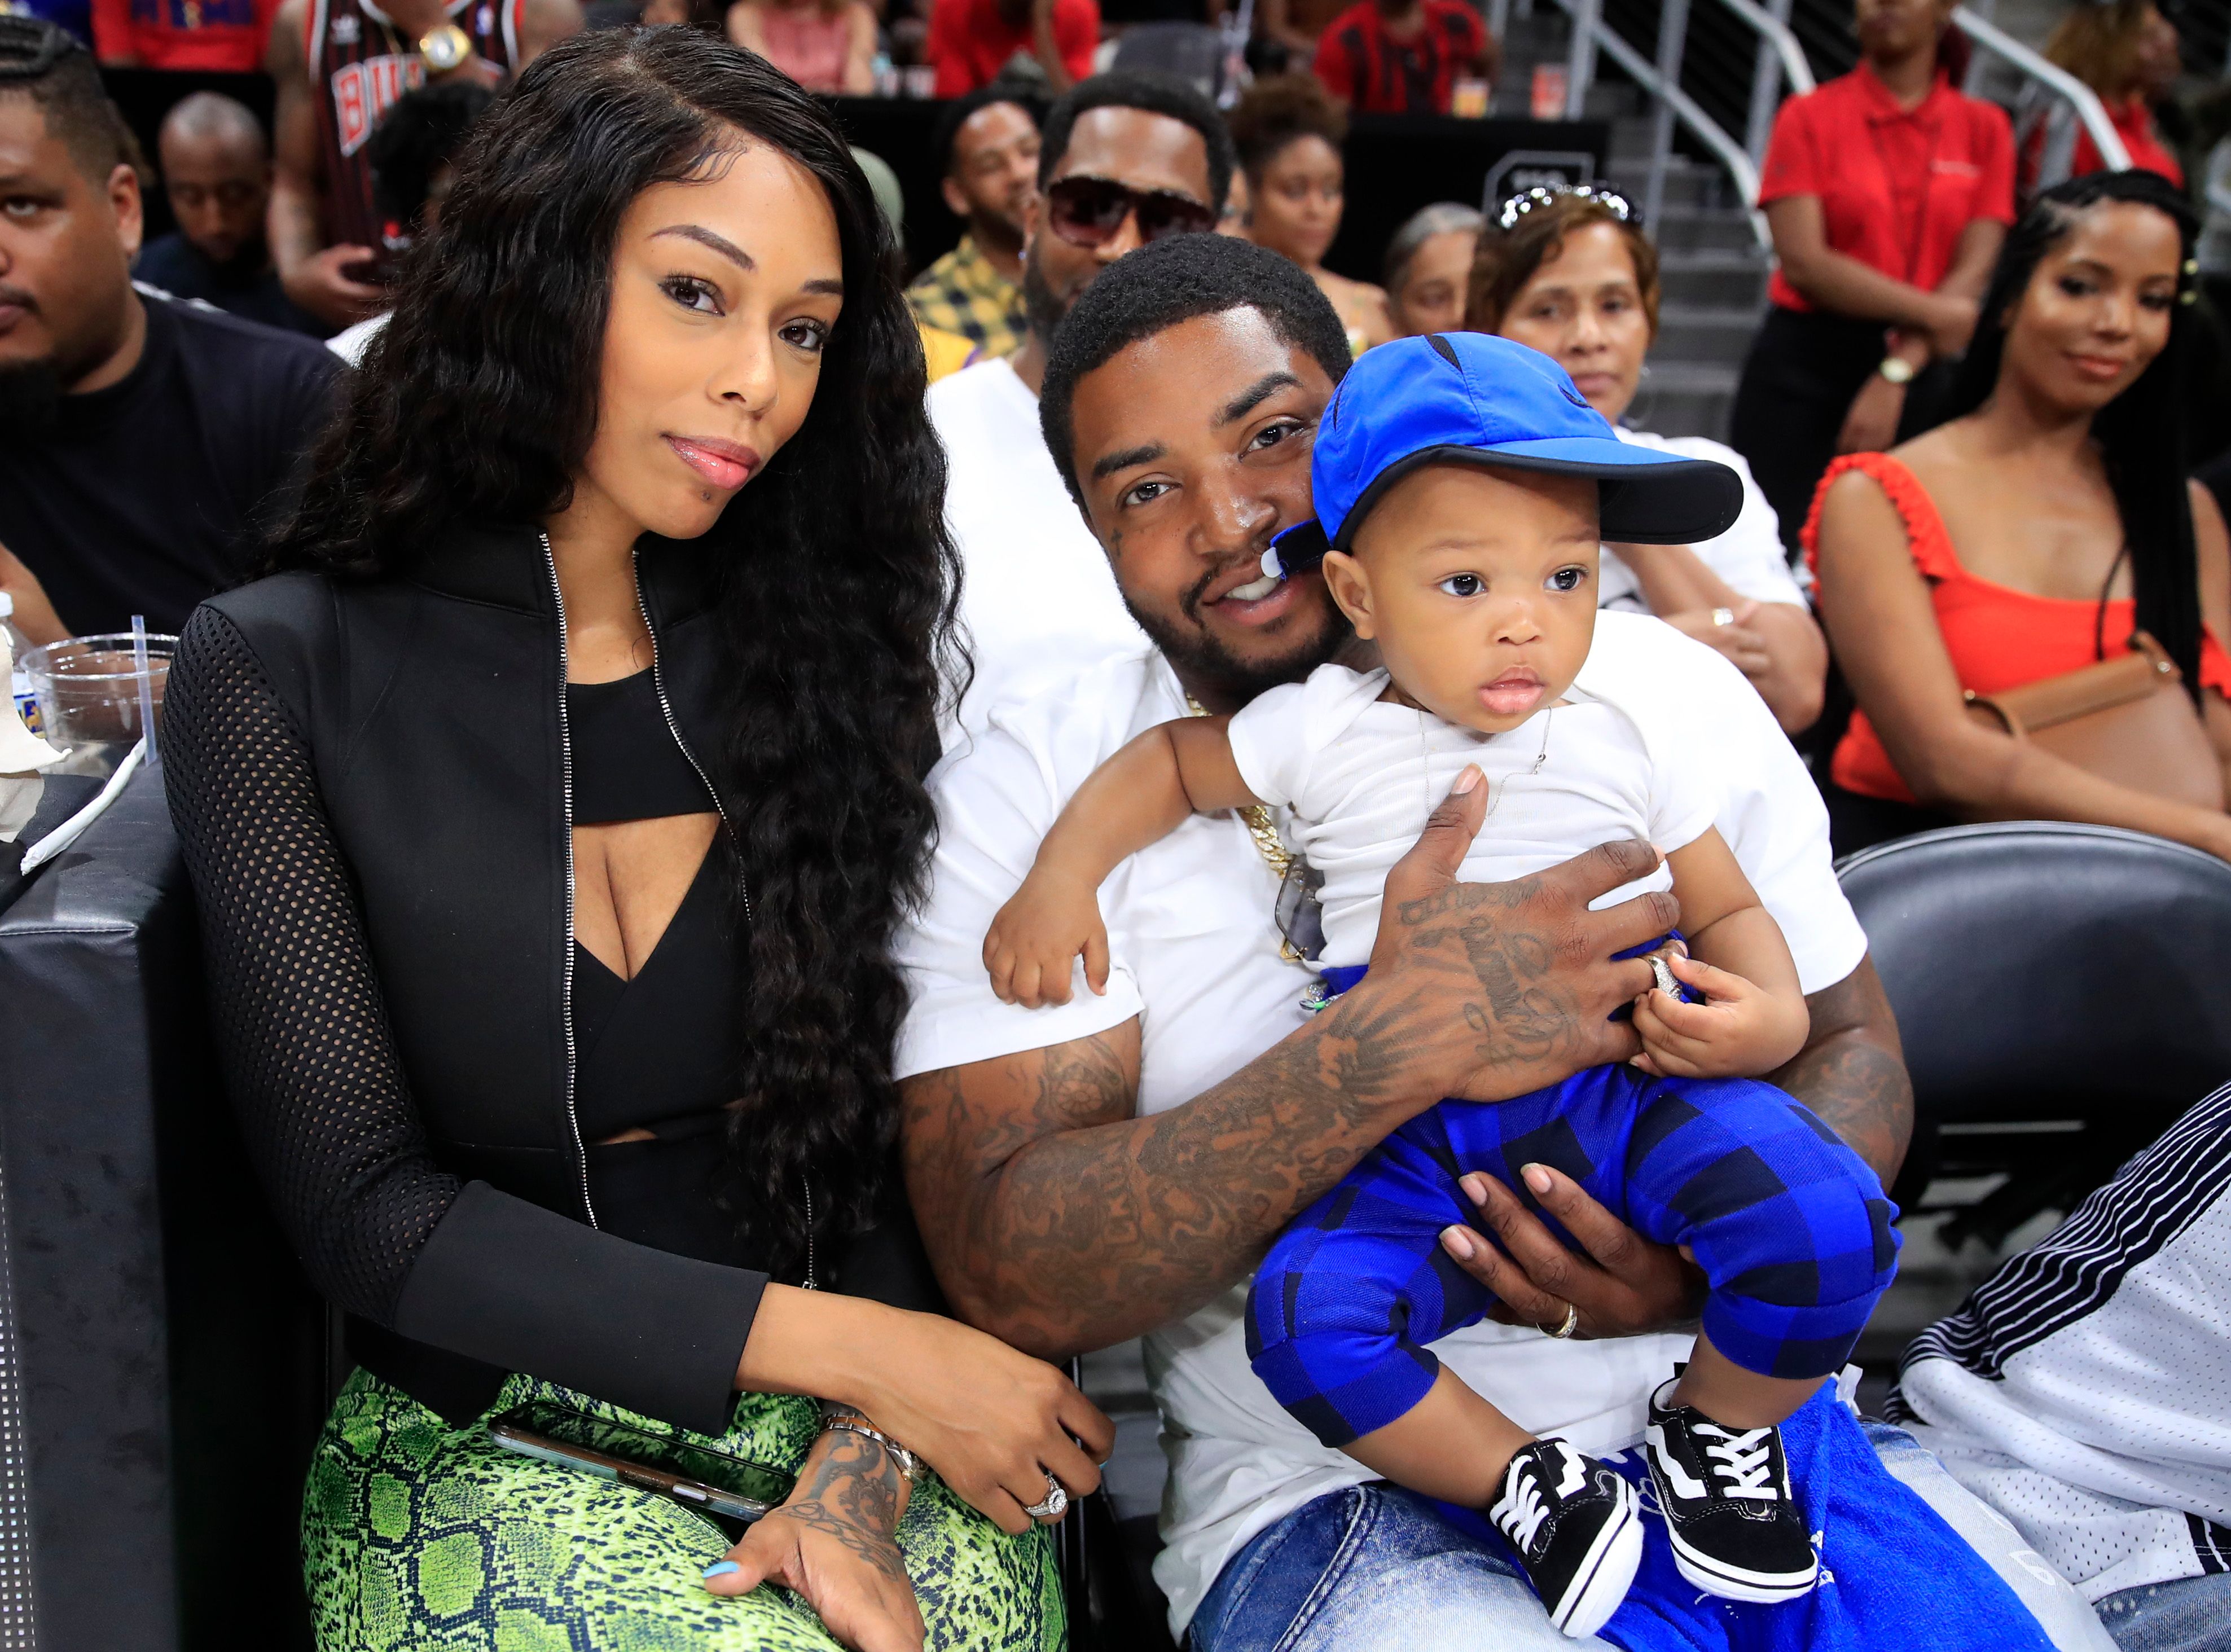 Bambi Benson, Lil Scrappy, and Breland during week 3 of the BIG3 three on three basketball league on July 07, 2019 in Atlanta, Georgia. | Source: Getty Images